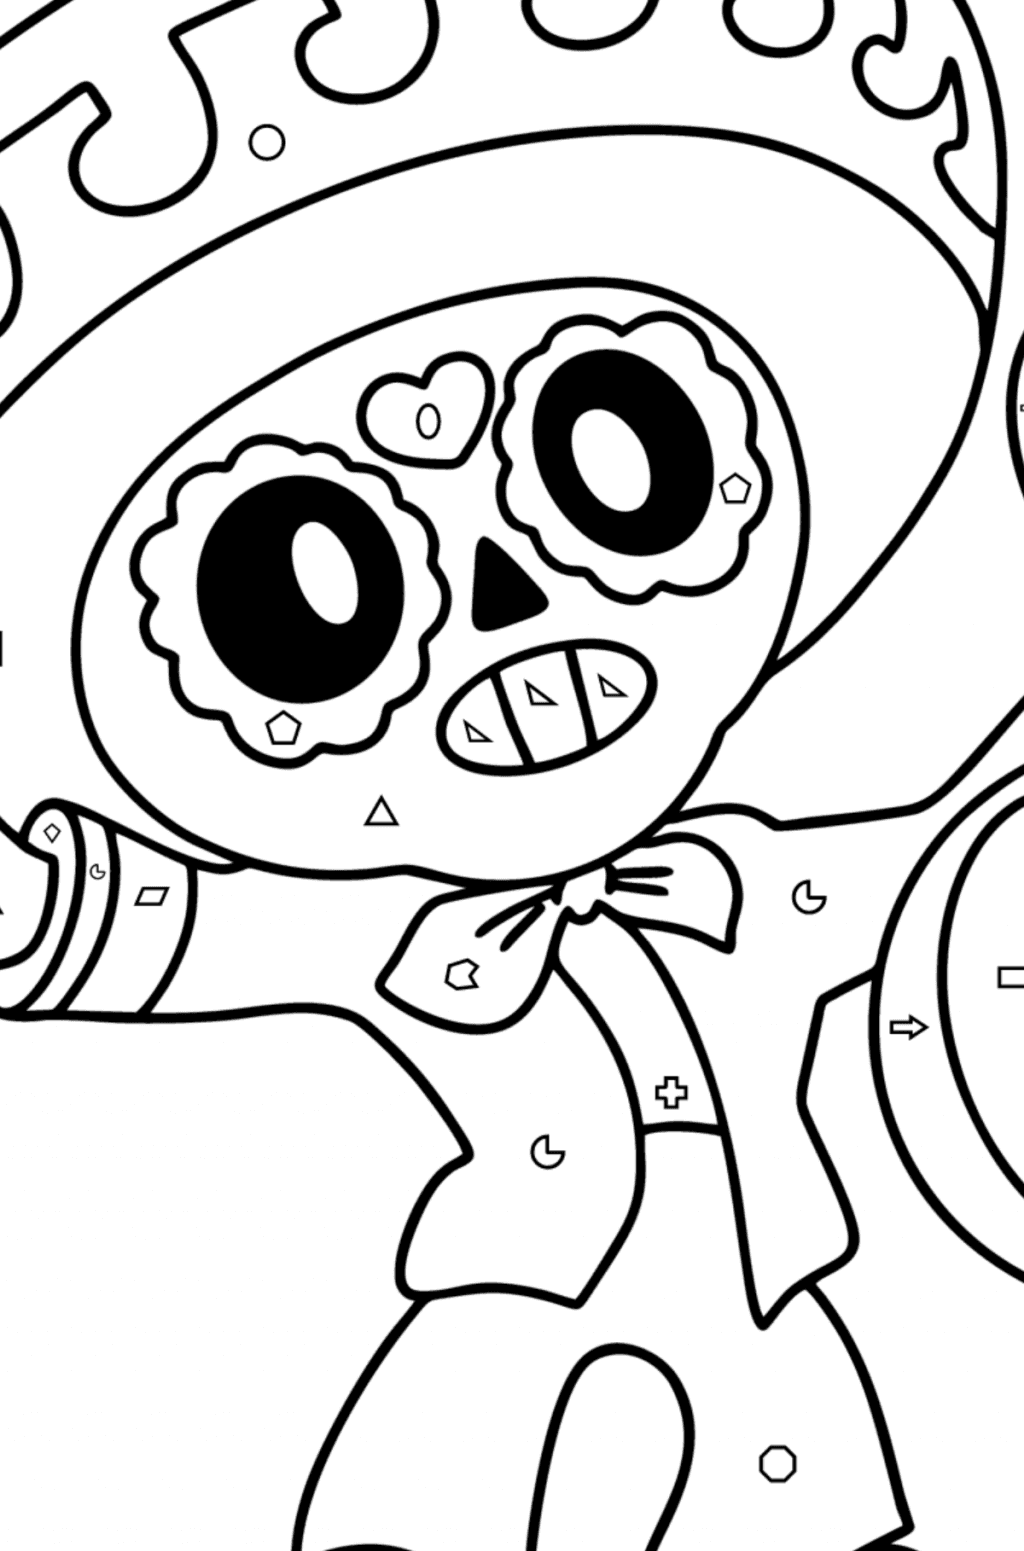 Brawl Stars Poco coloring page ♥ Online and Print for Free!